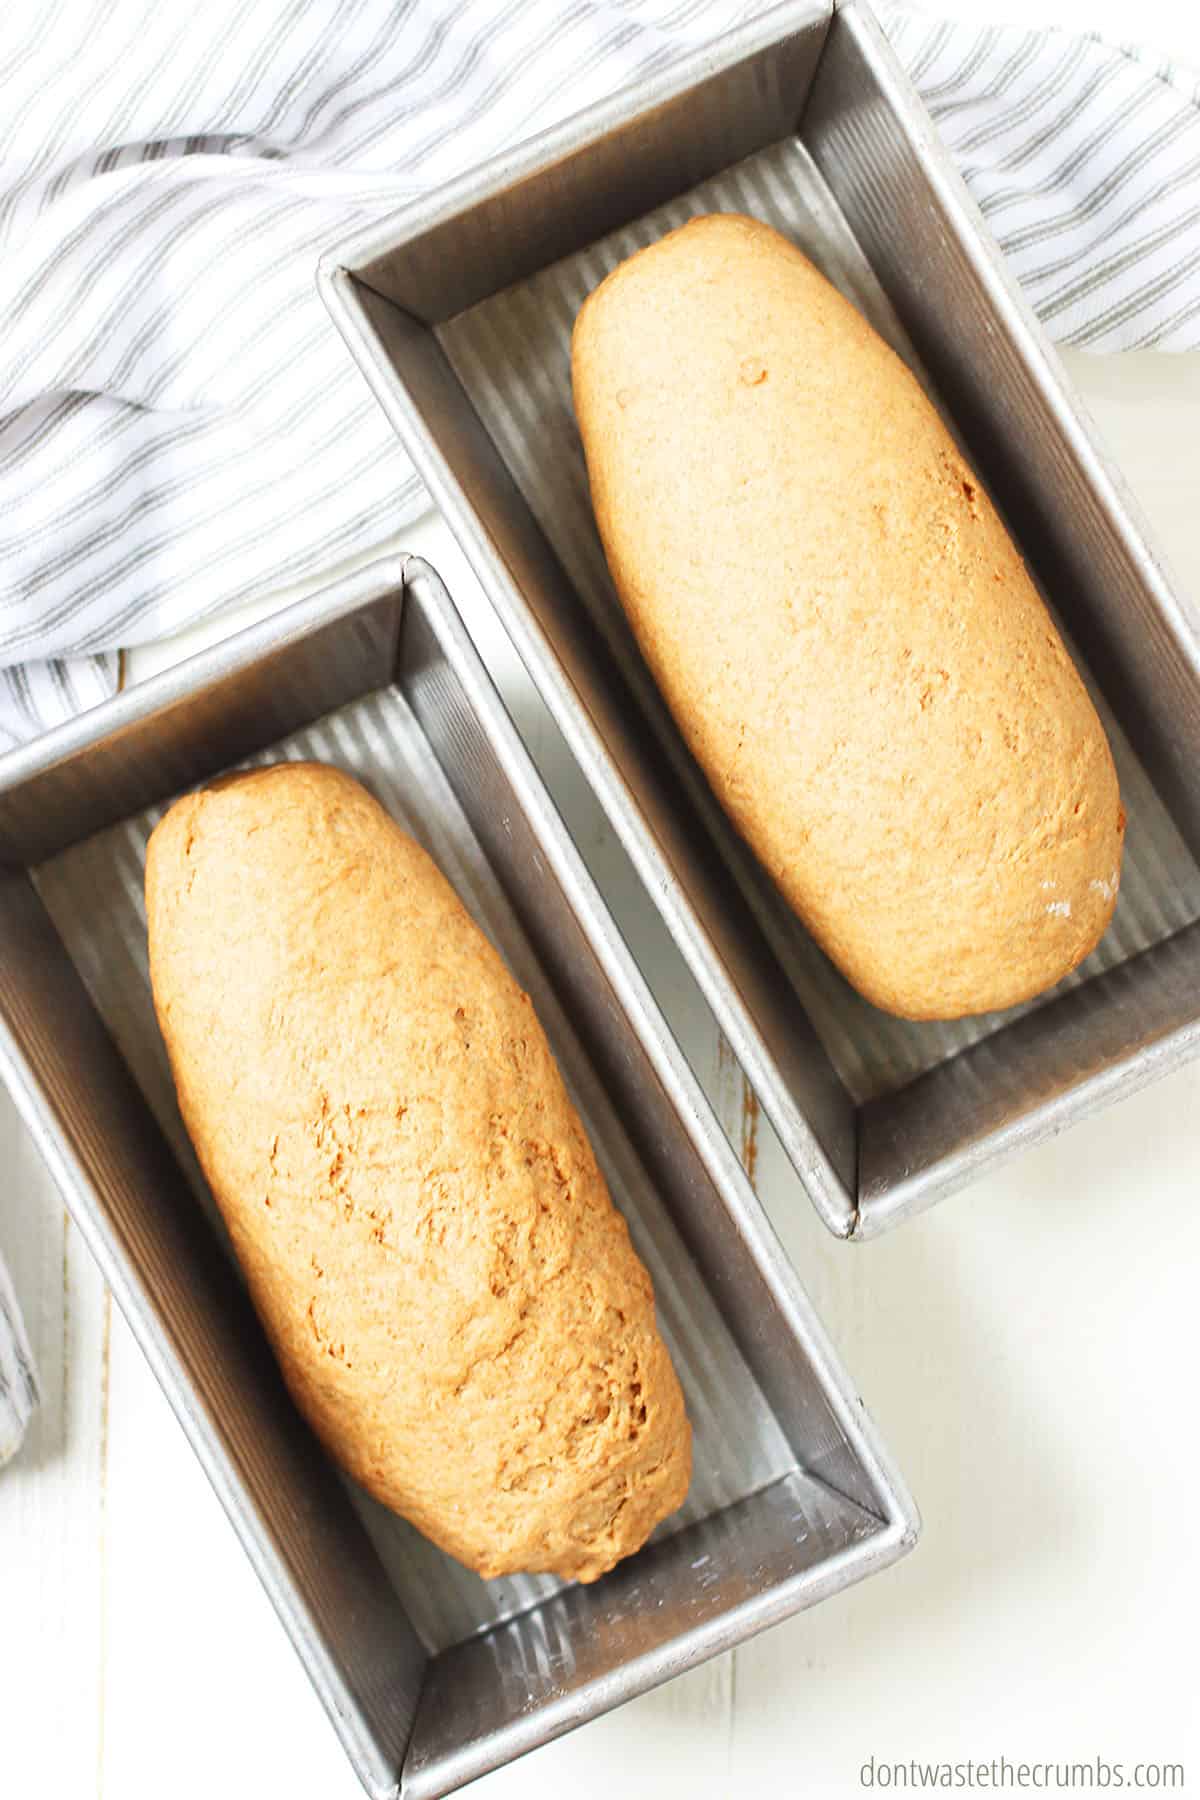 Pictured are two loaves of soaked whole wheat bread in bread pans.